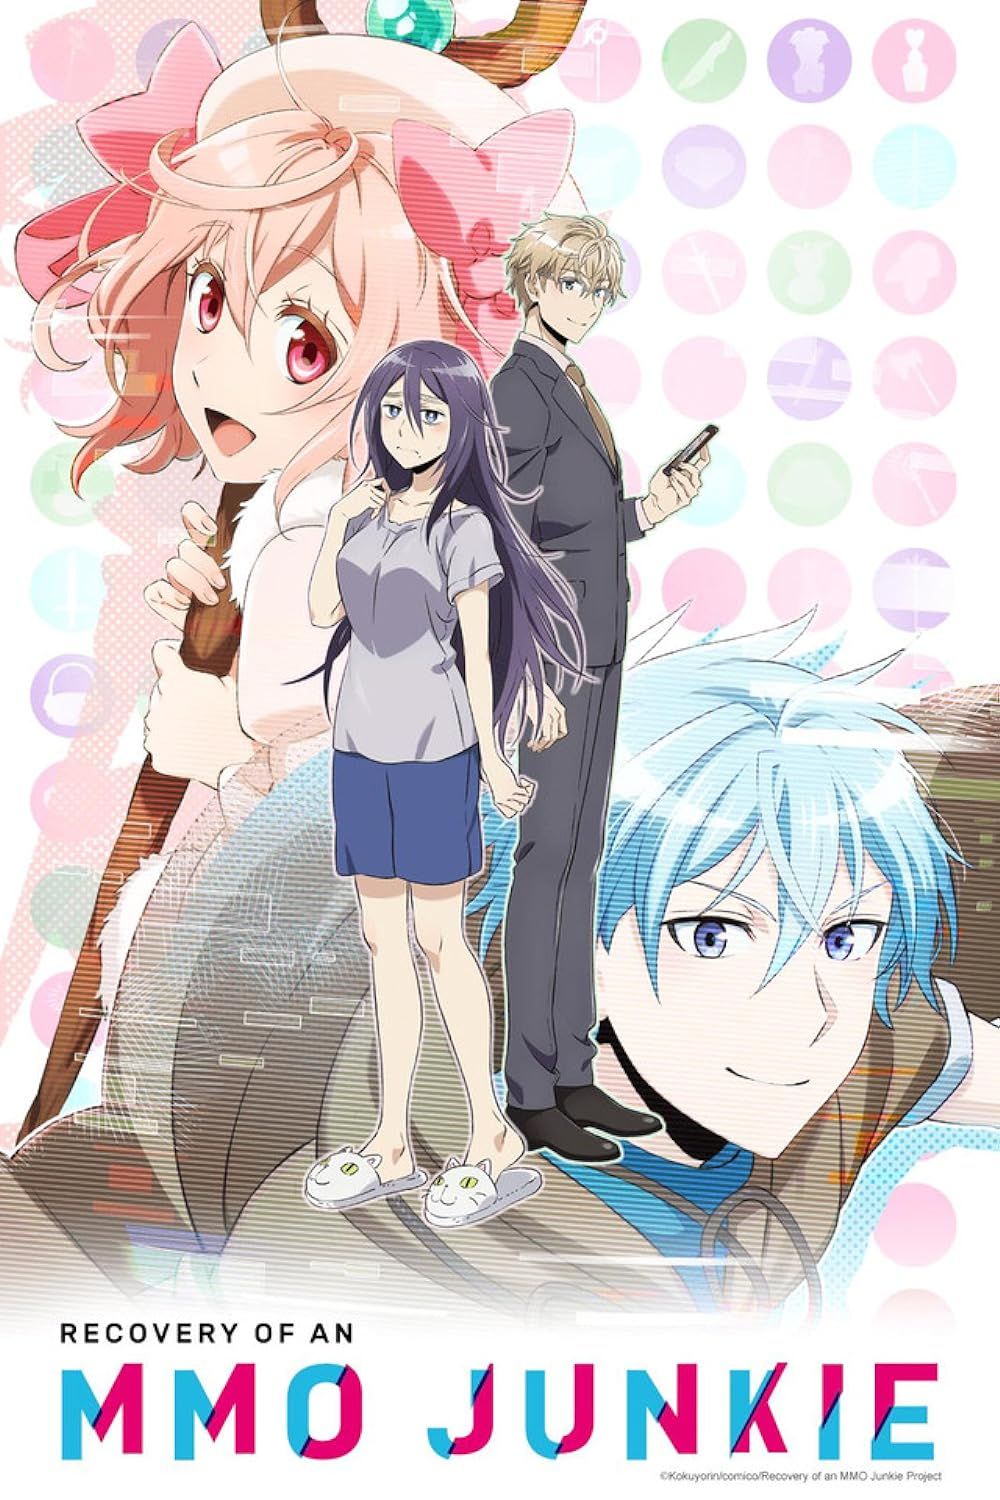 The characters of Recovery Of An MMO Junkie posing on the official poster.